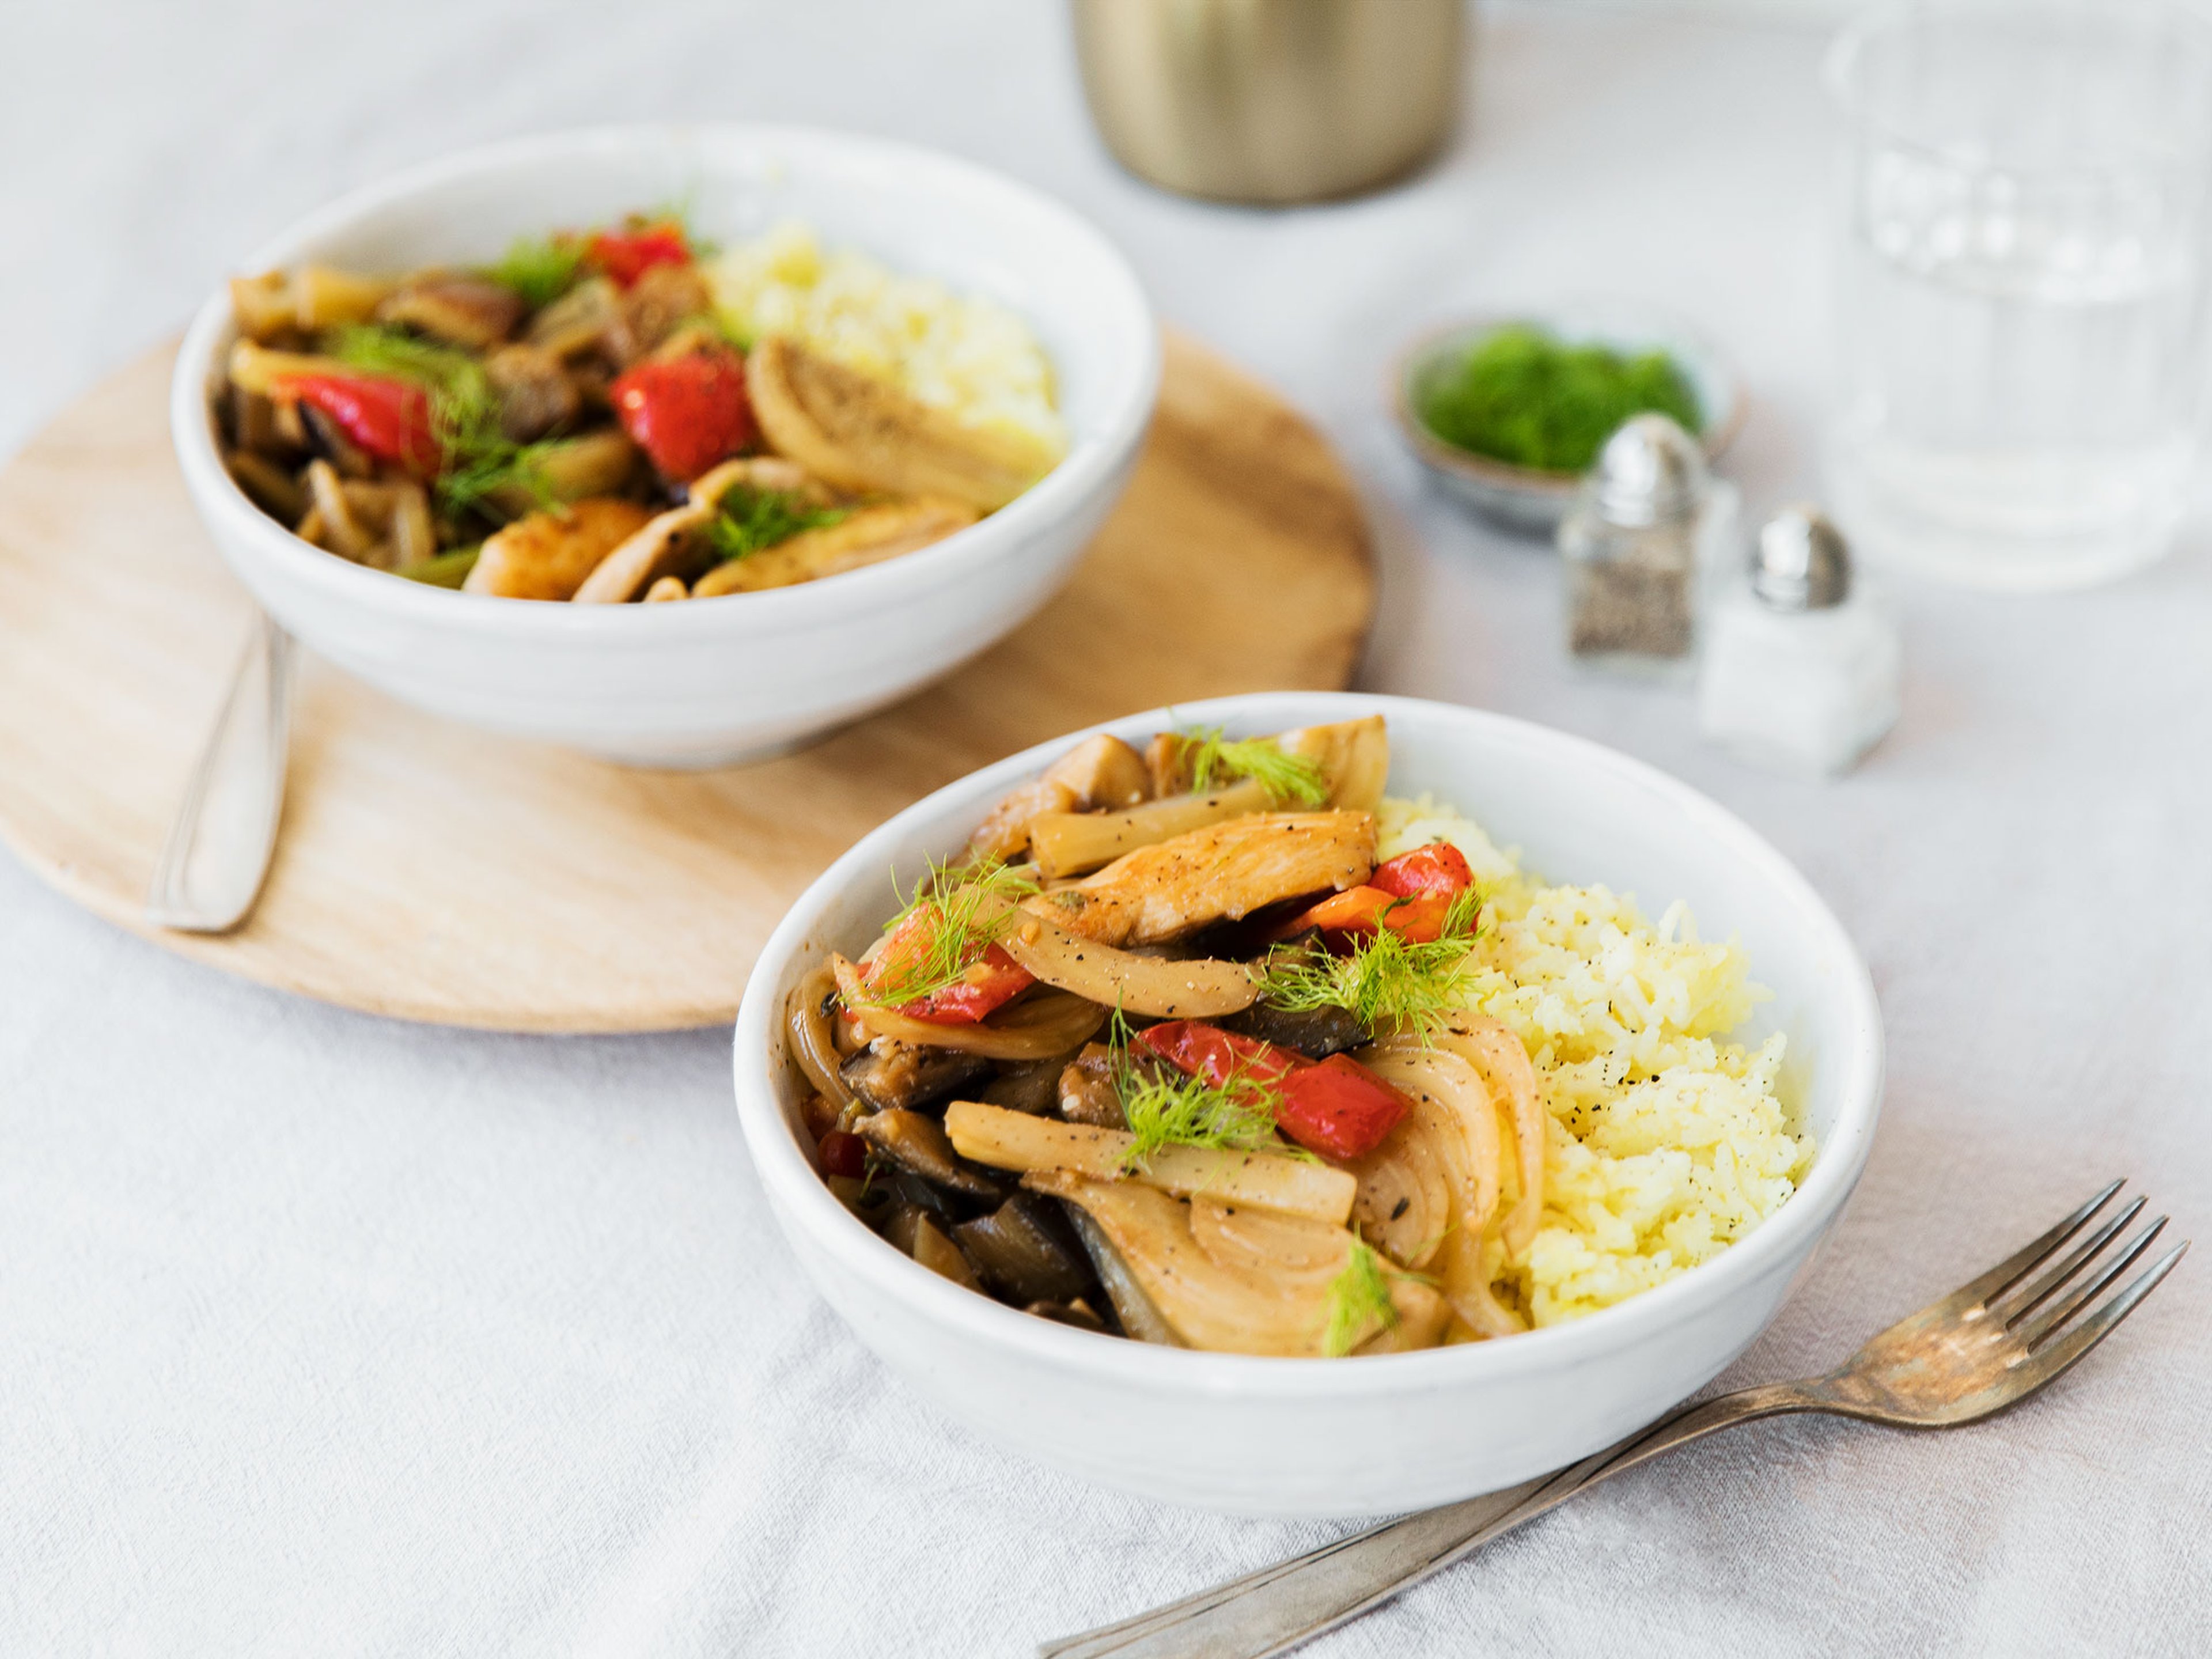 Chicken with fennel, eggplant, and turmeric-scented rice